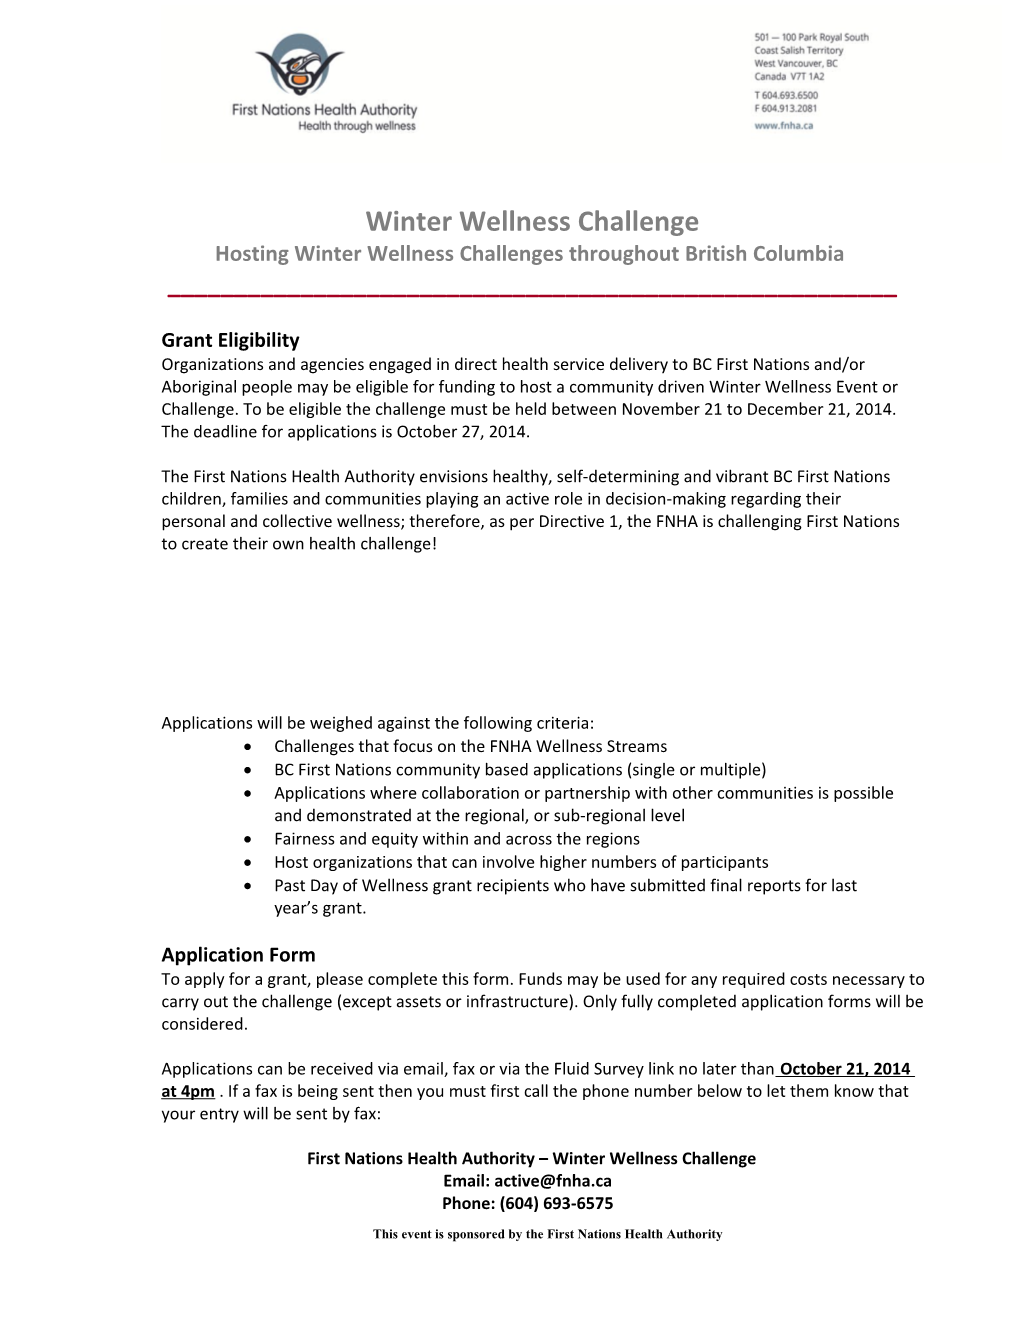 Hosting Winter Wellness Challenges Throughout British Columbia